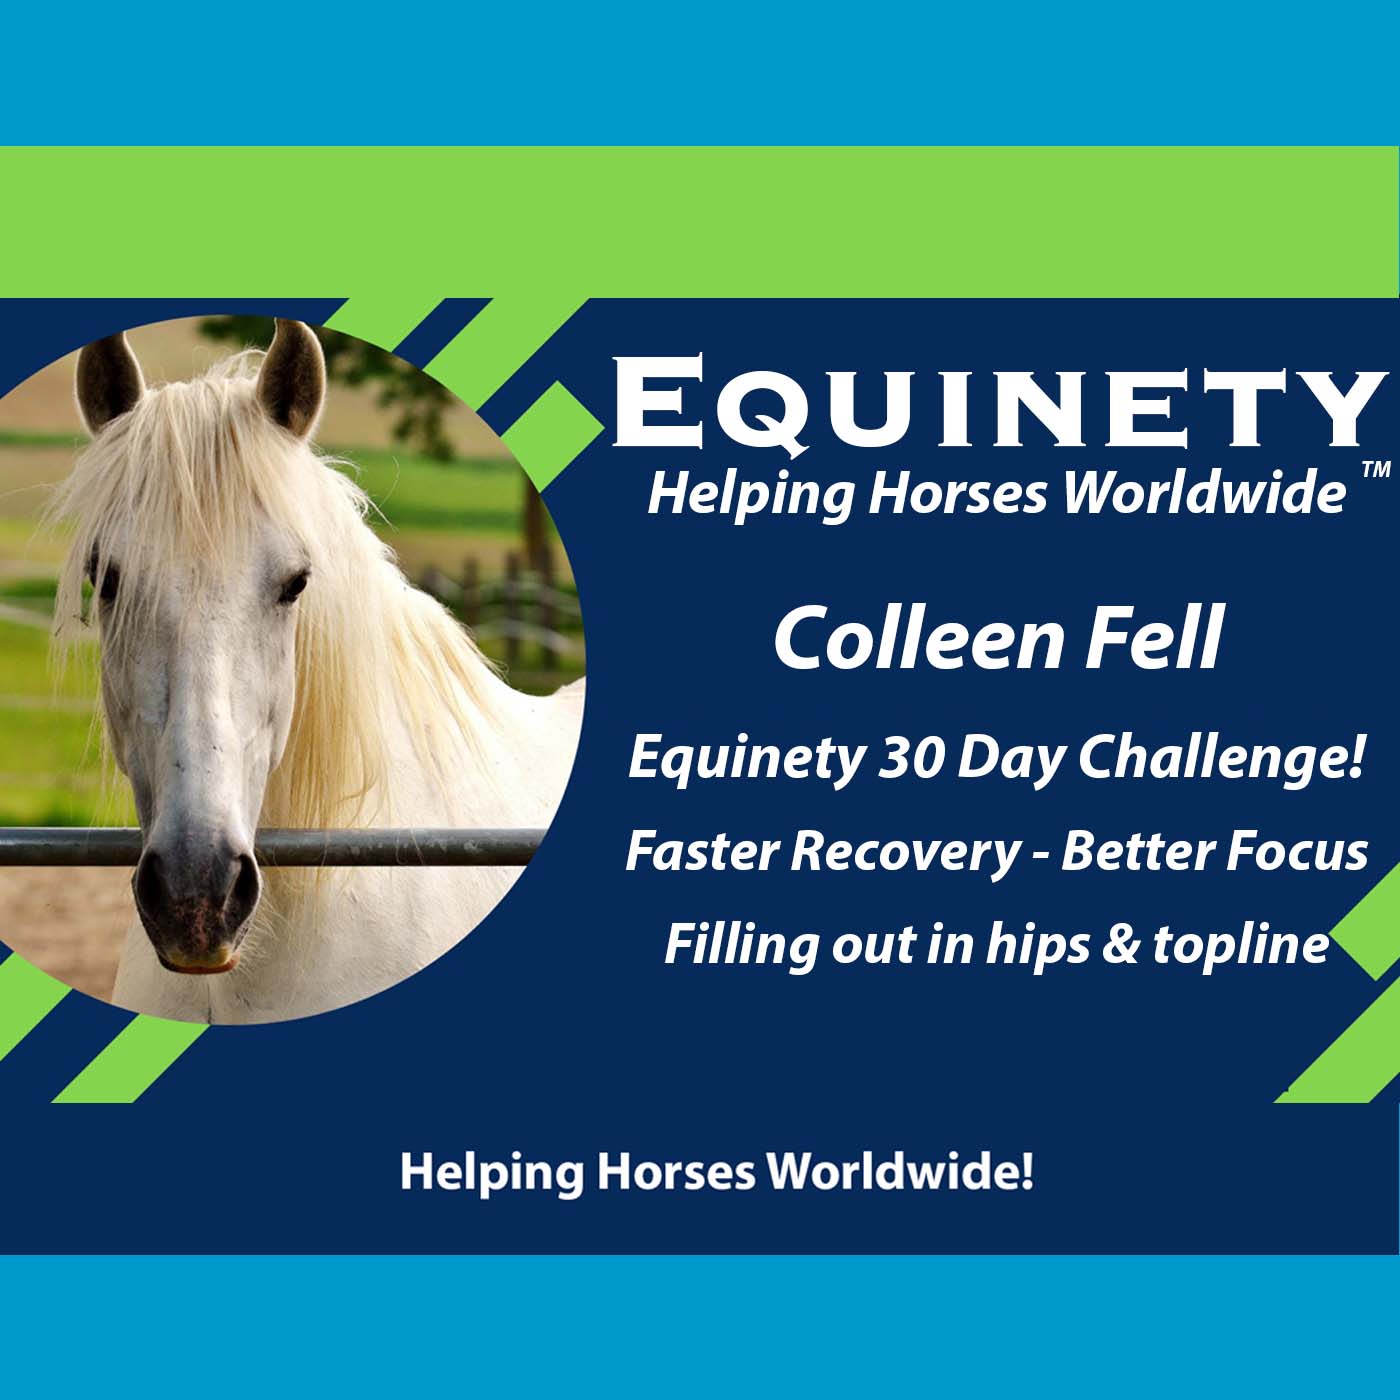 Colleen Fell - Better Recovery - .More Focused - Shinier Coat - Topline - Hips